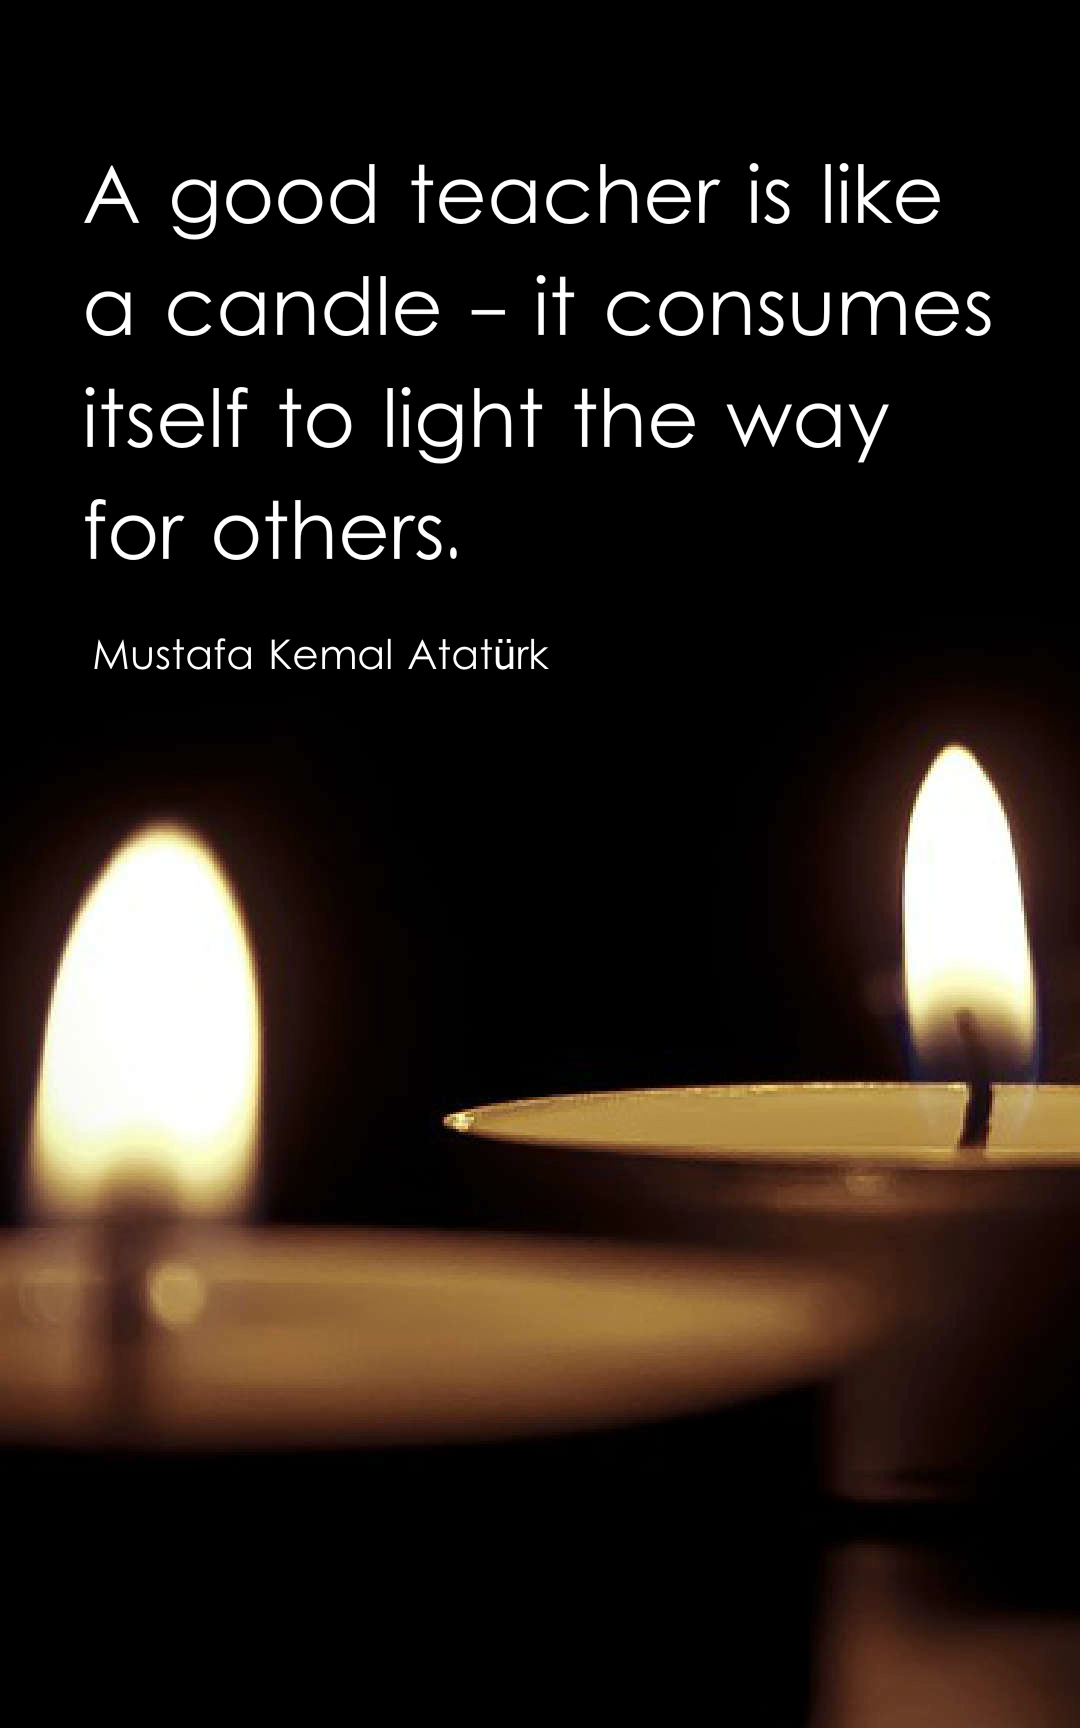 A good teacher is like a candle - it consumes itself to light the way for others.